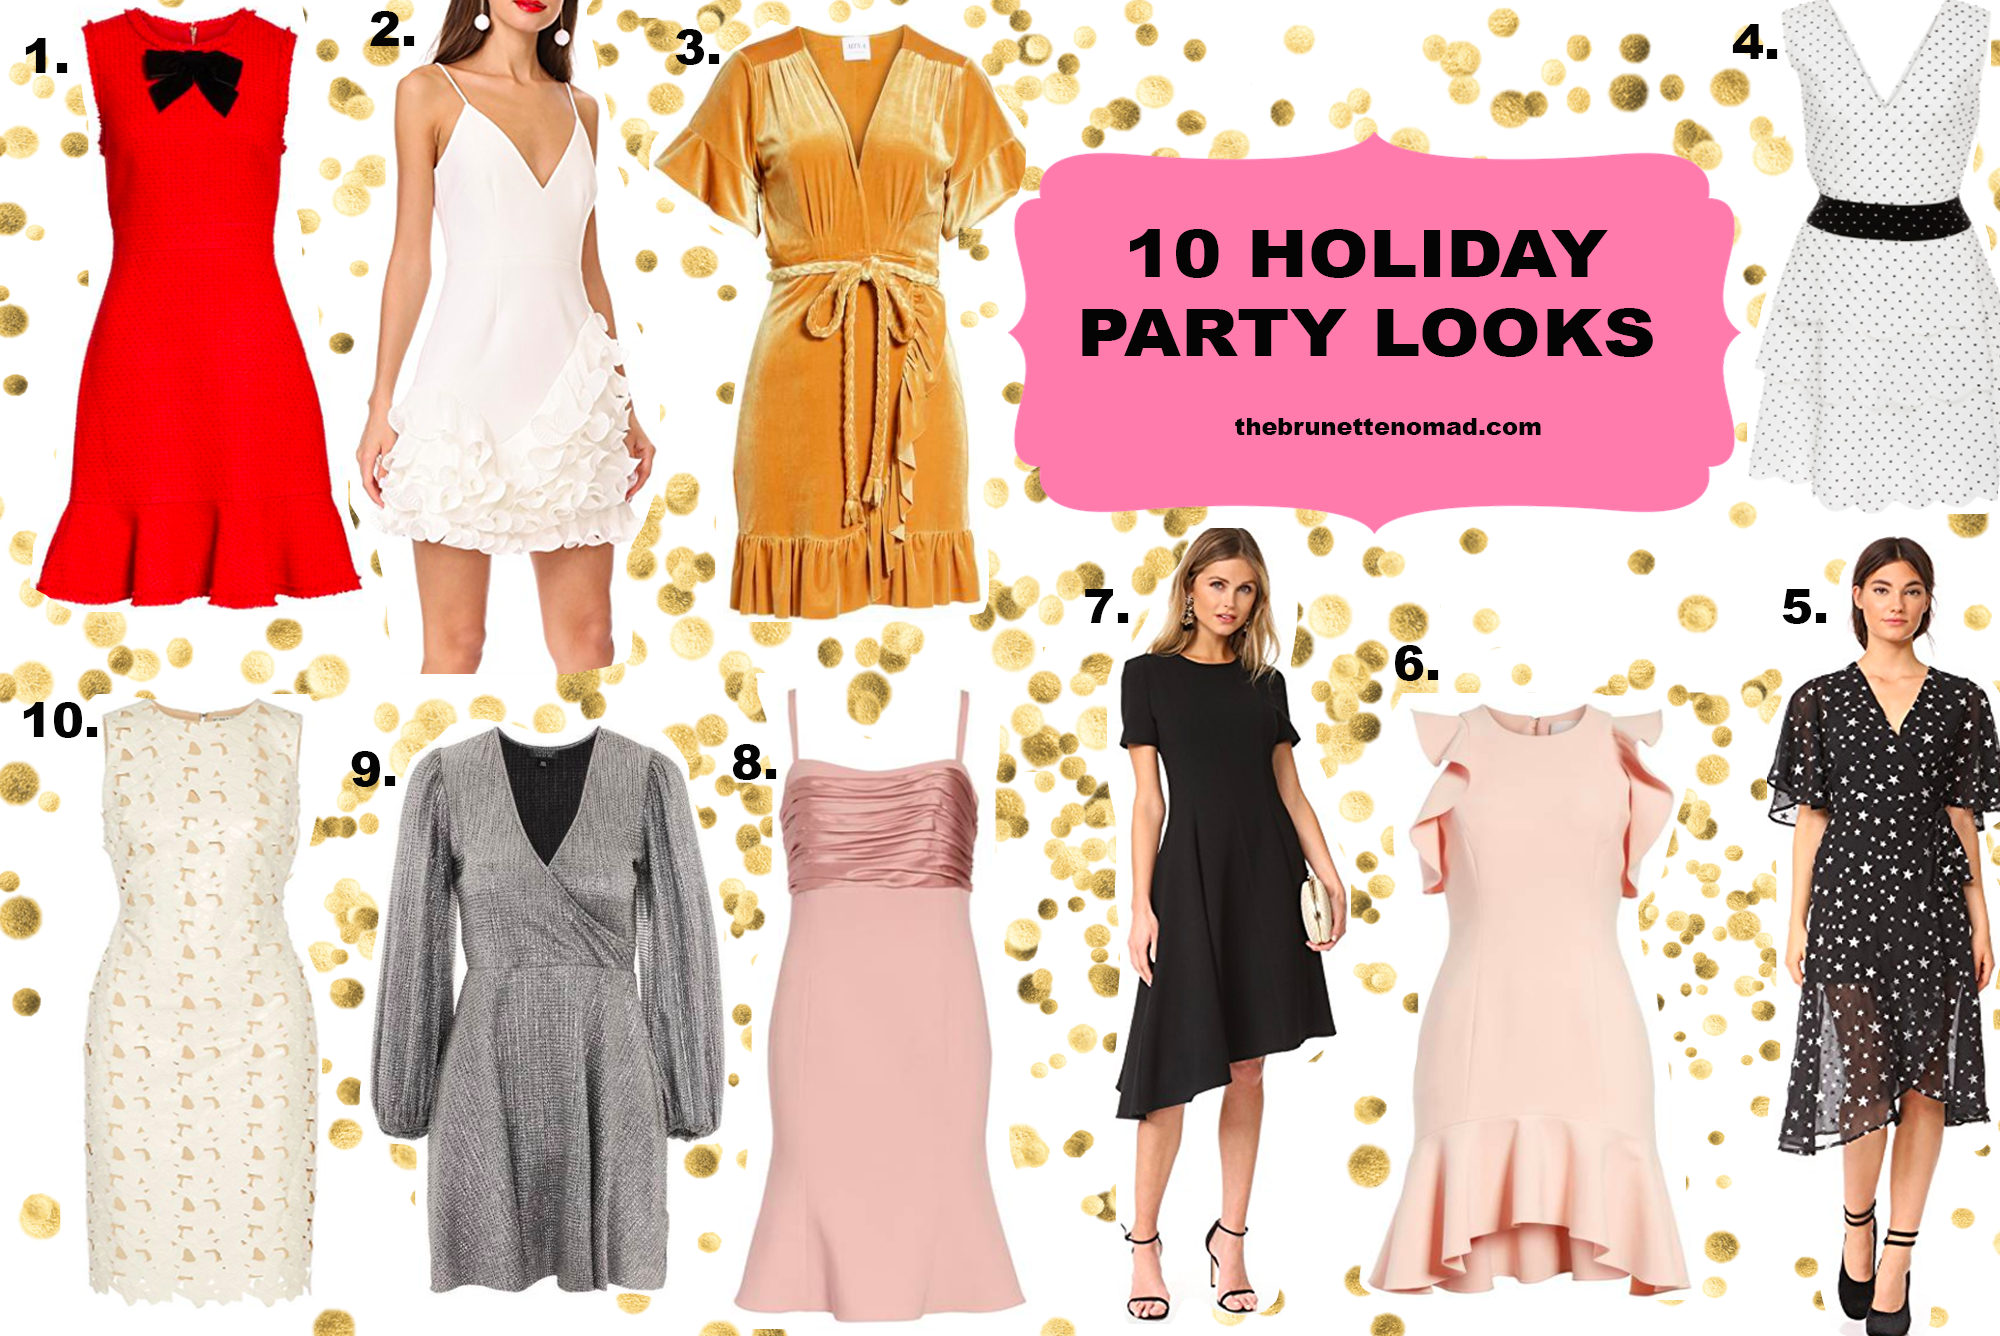 Cristina from The Brunette Nomad, Dallas fashion blogger living in Switzerland, shares 10 holiday party dresses for any occasion 